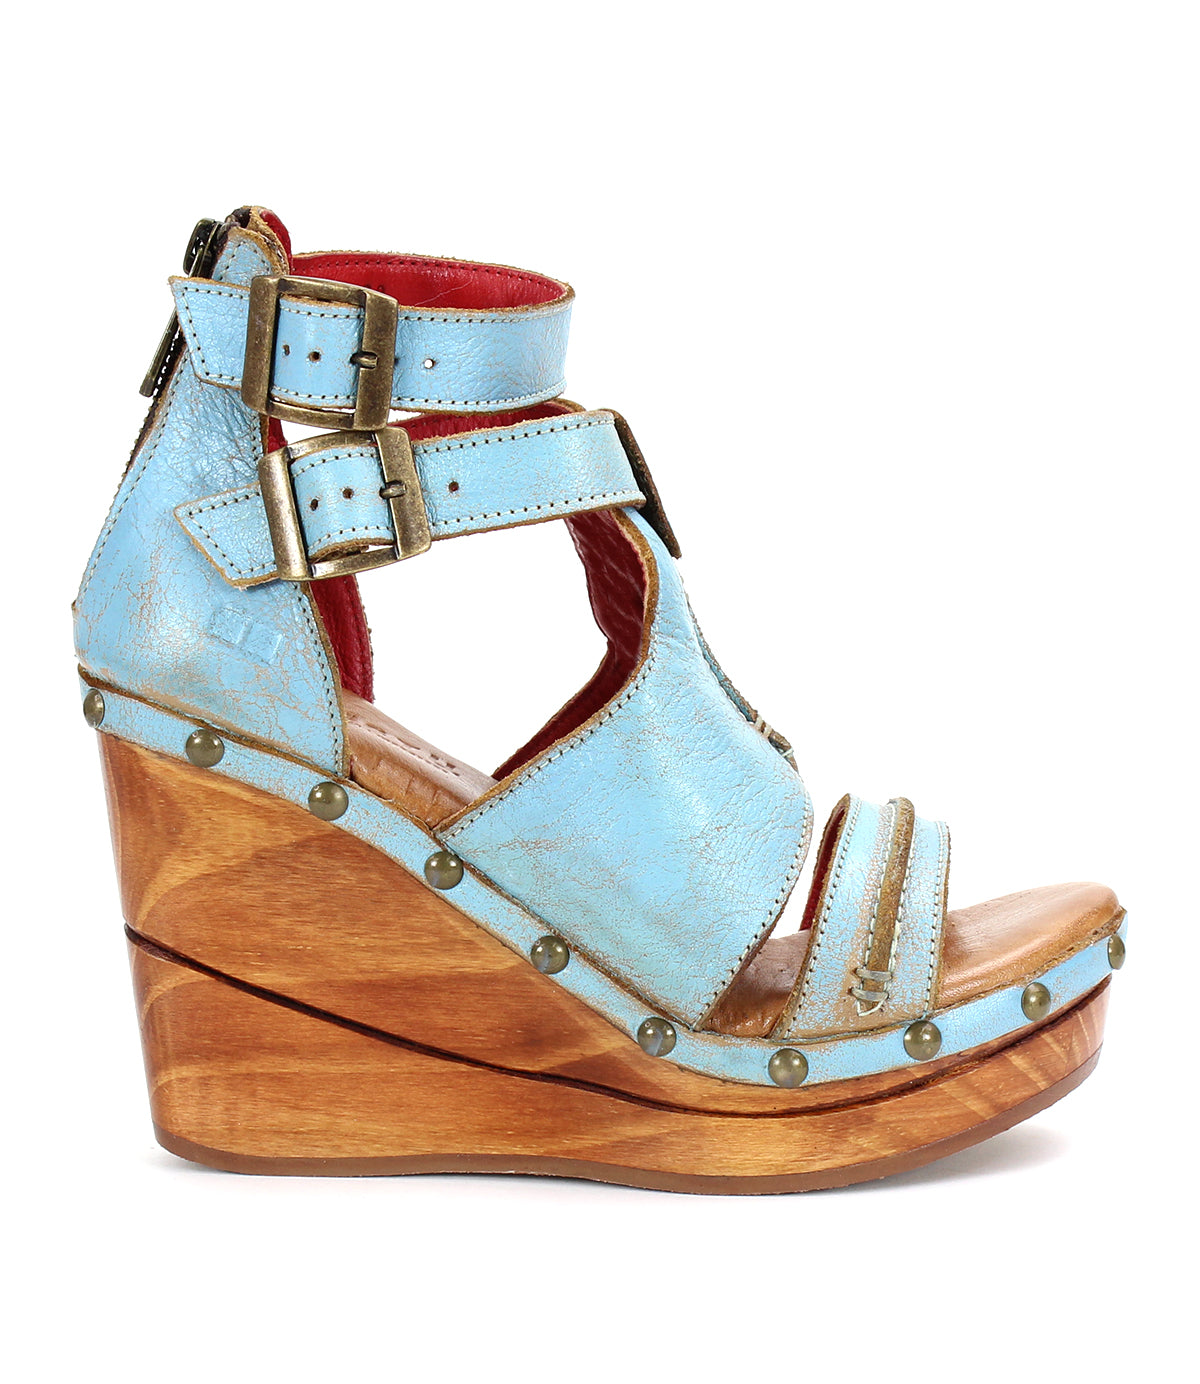 A women's blue wedge sandal called "Princess" from the brand "Bed Stu" with sustainable wooden platform and woven strappy uppers.